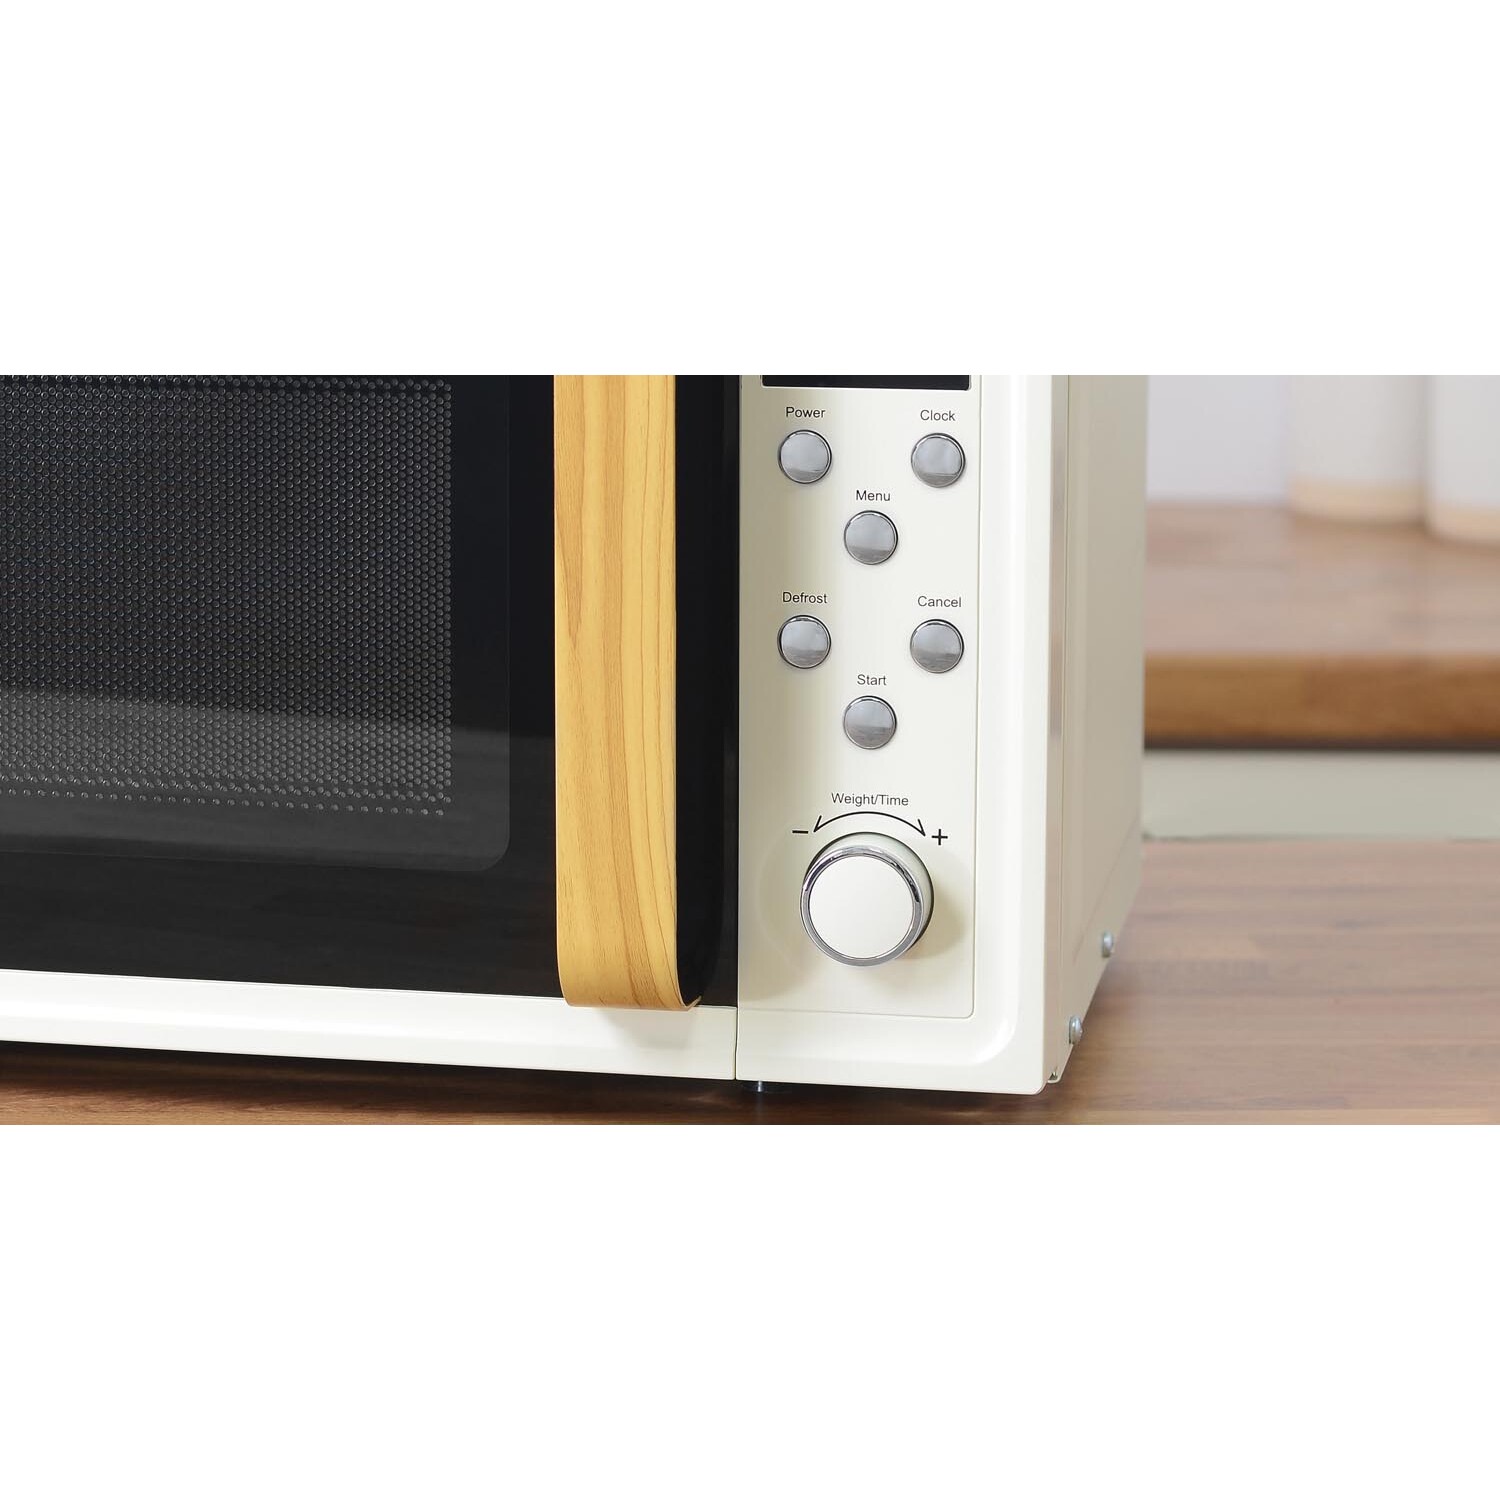 Oslo Cream and Wood Effect 20L Microwave Image 4